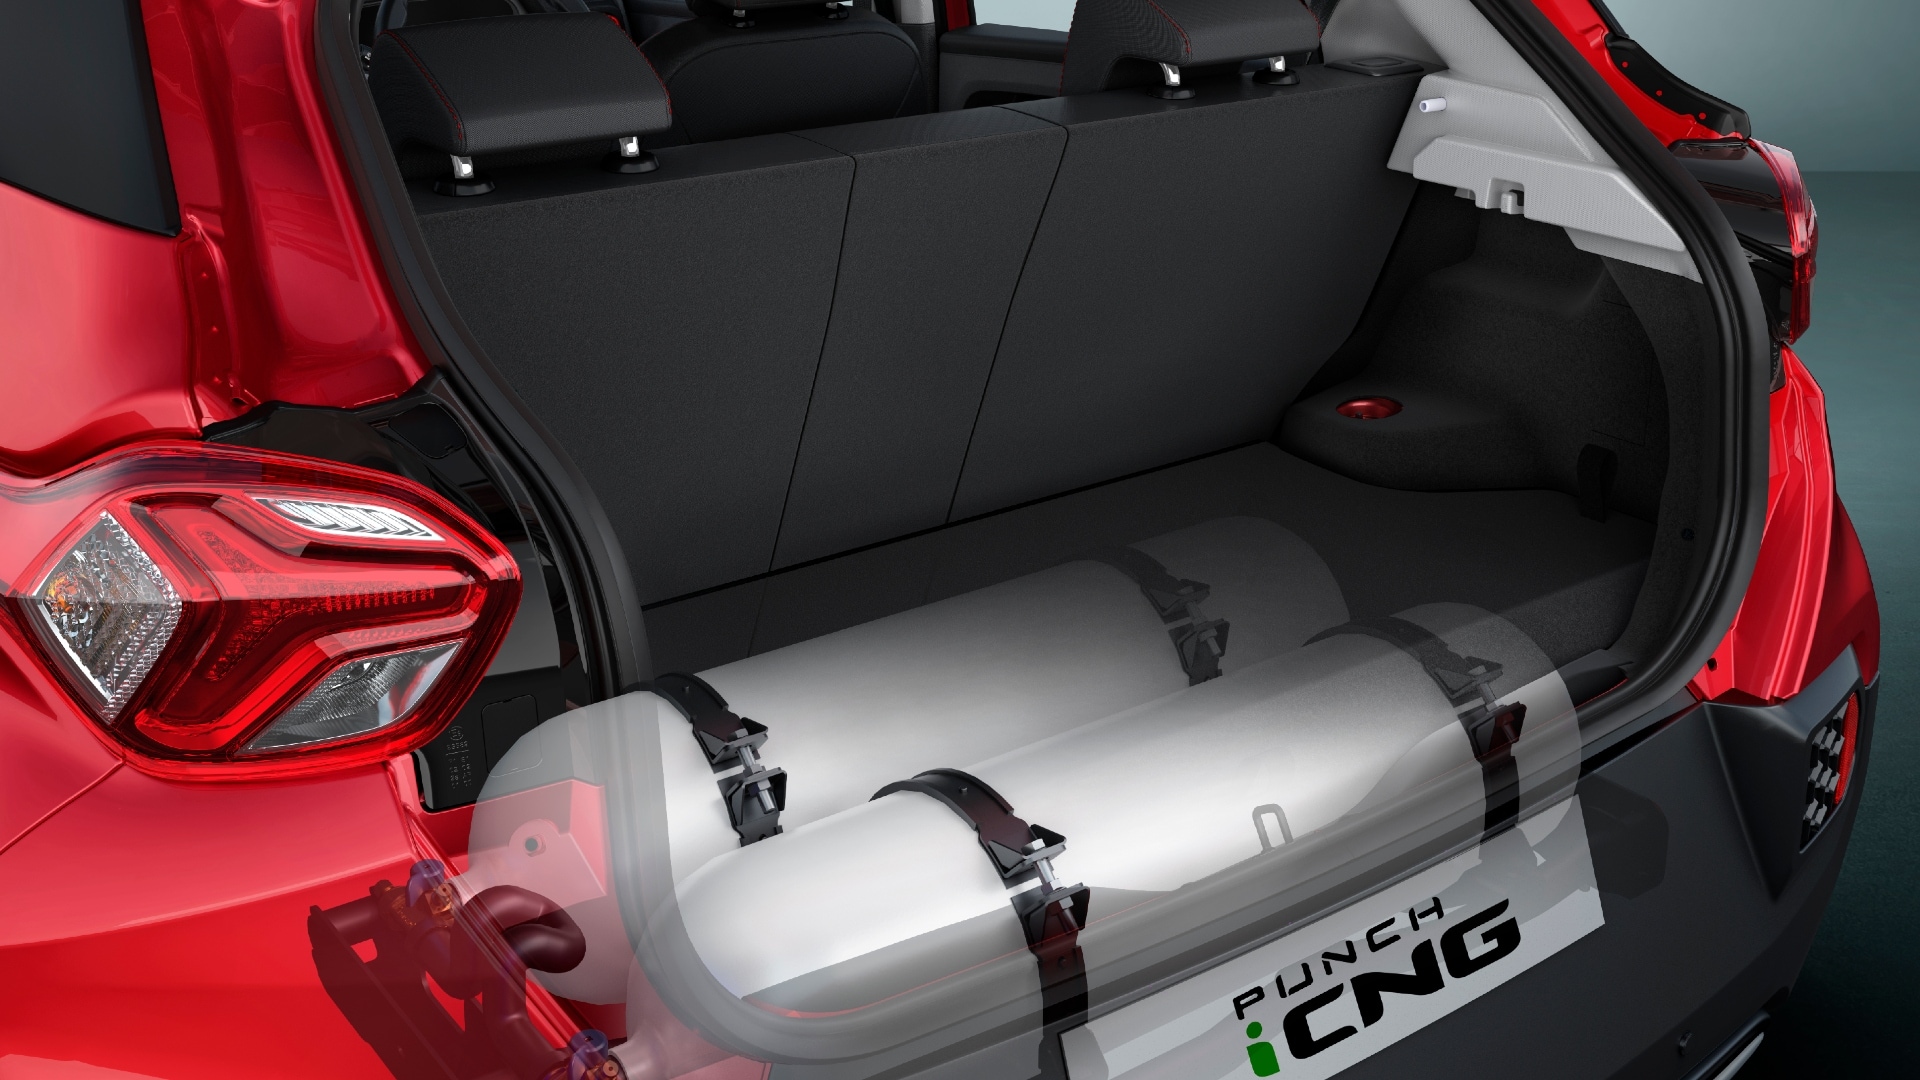 The Tata Punch CNG will come with twin-cylinder technology that brings two 30-litre tanks under the boot space, for a more practical storage solution